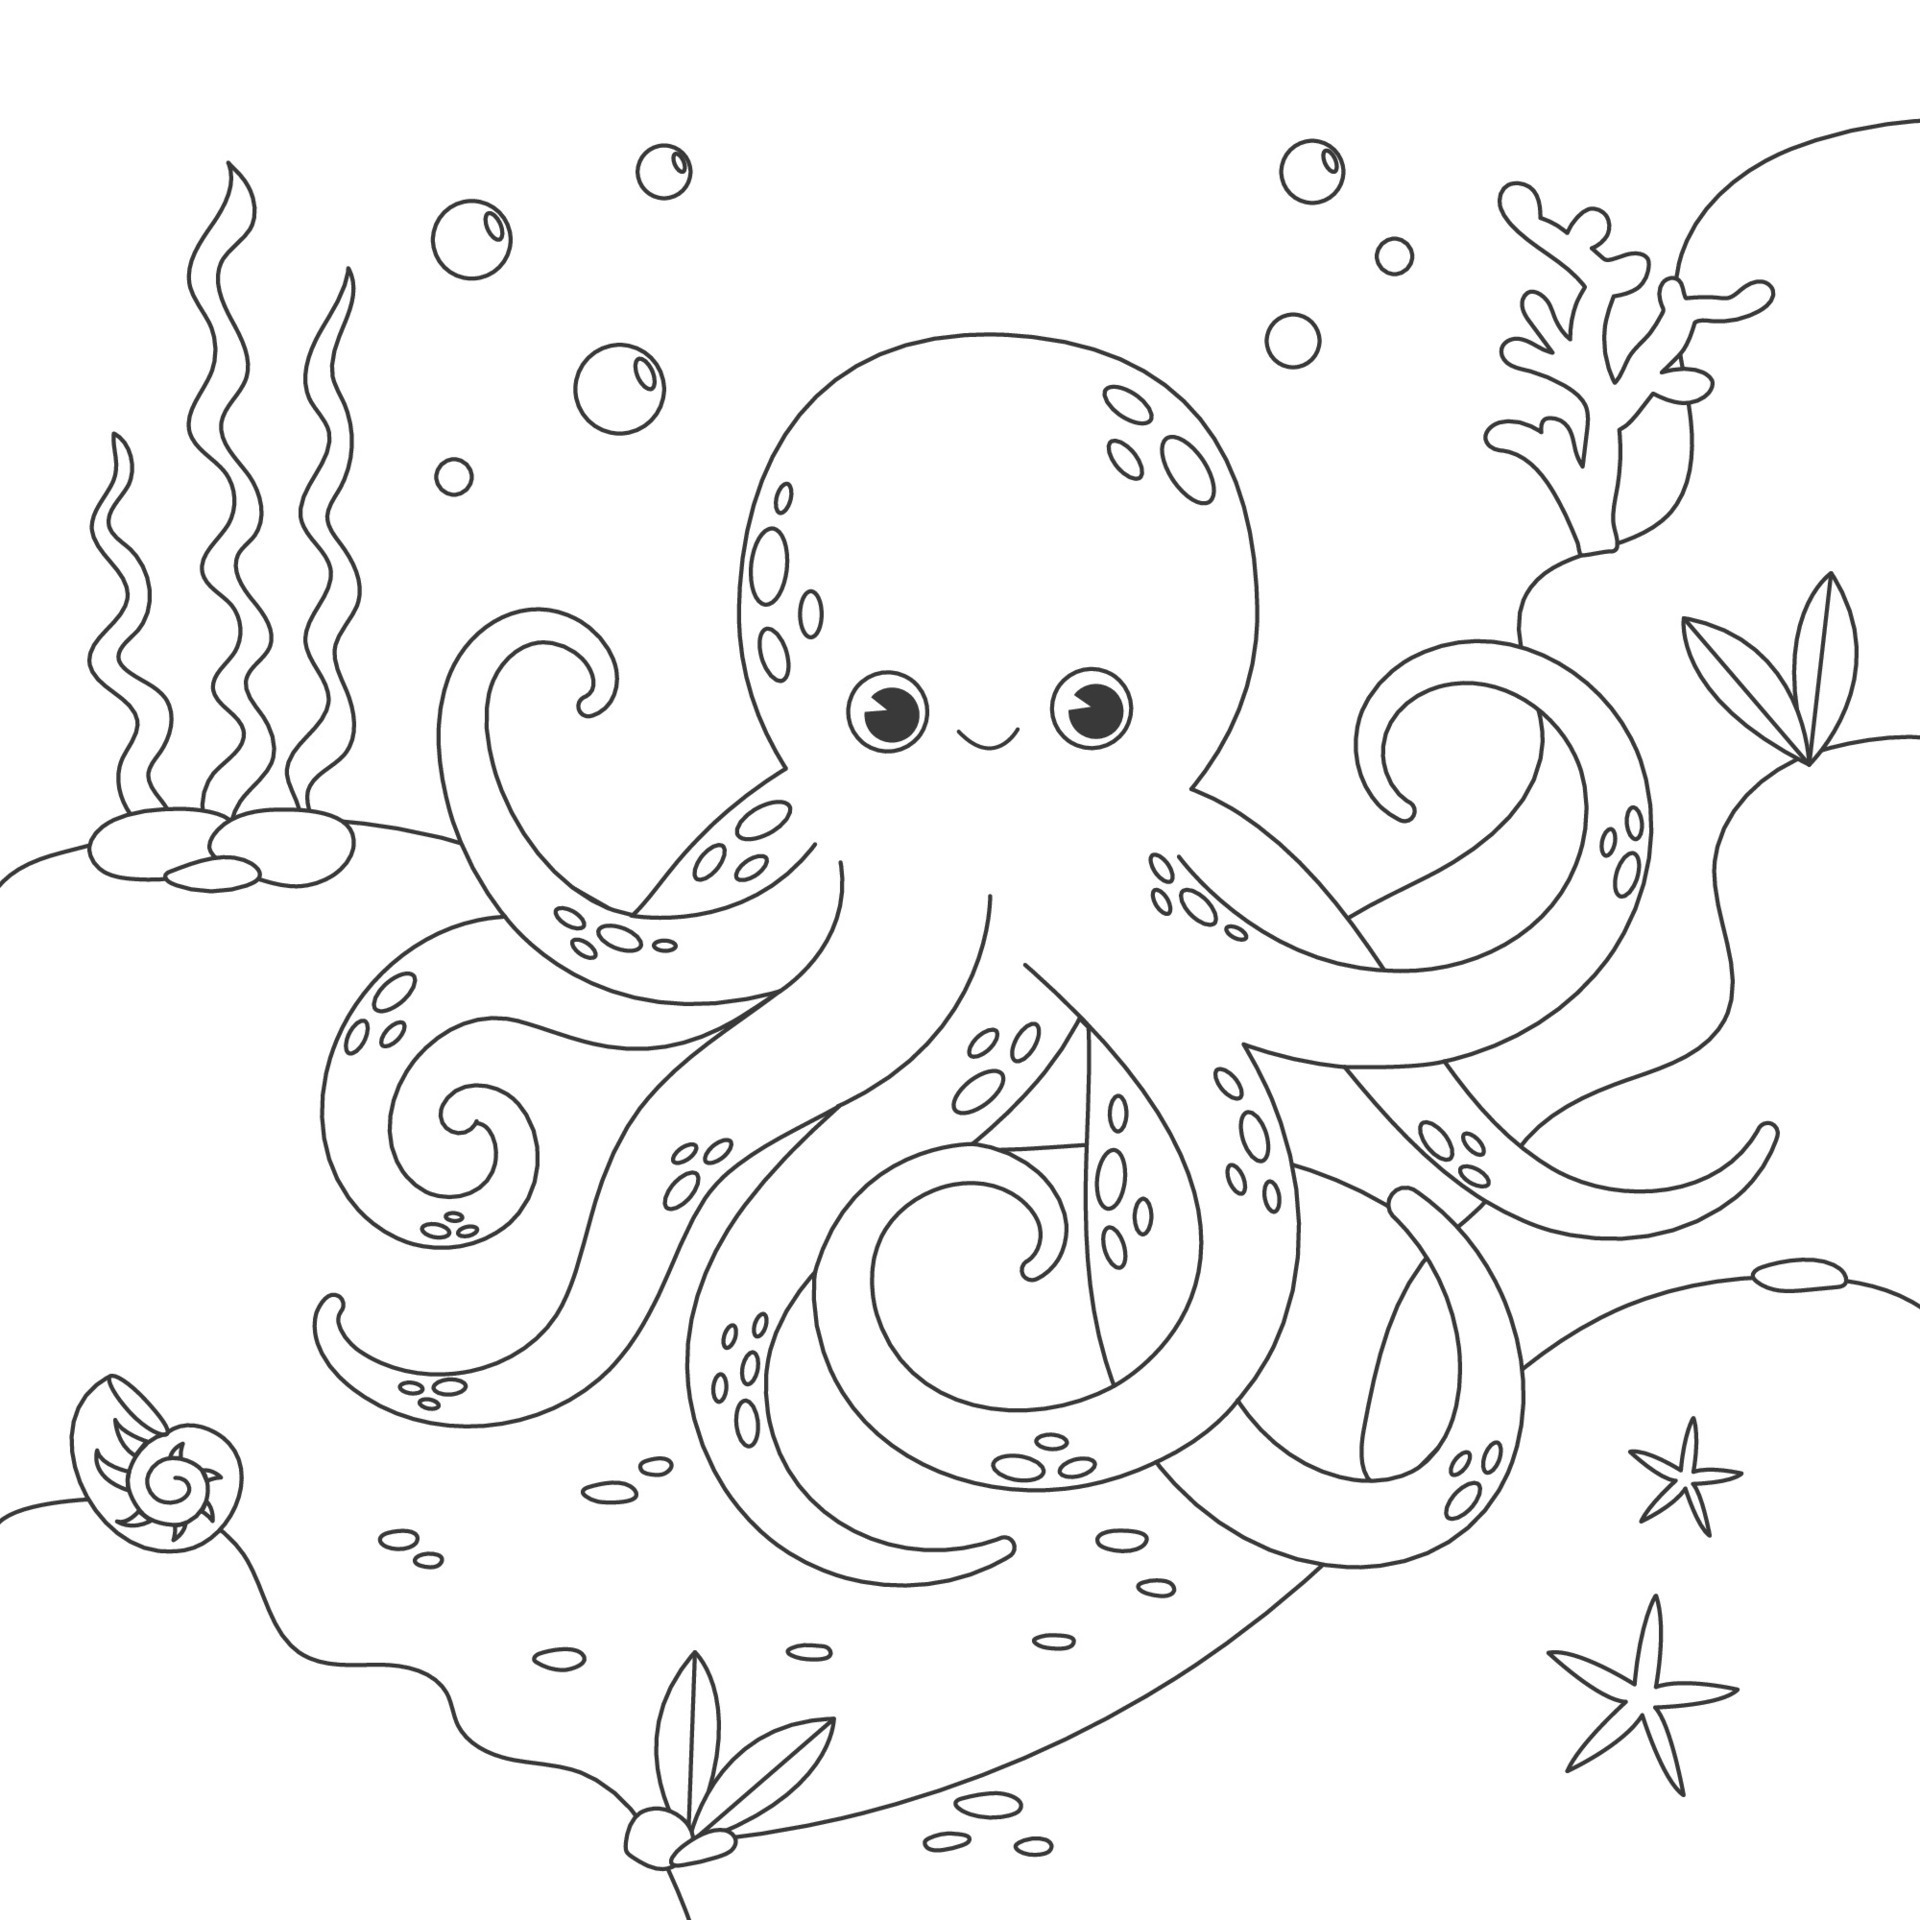 How to Draw an Octopus for Kindergarten  Easy Drawing Tutorial For Kids